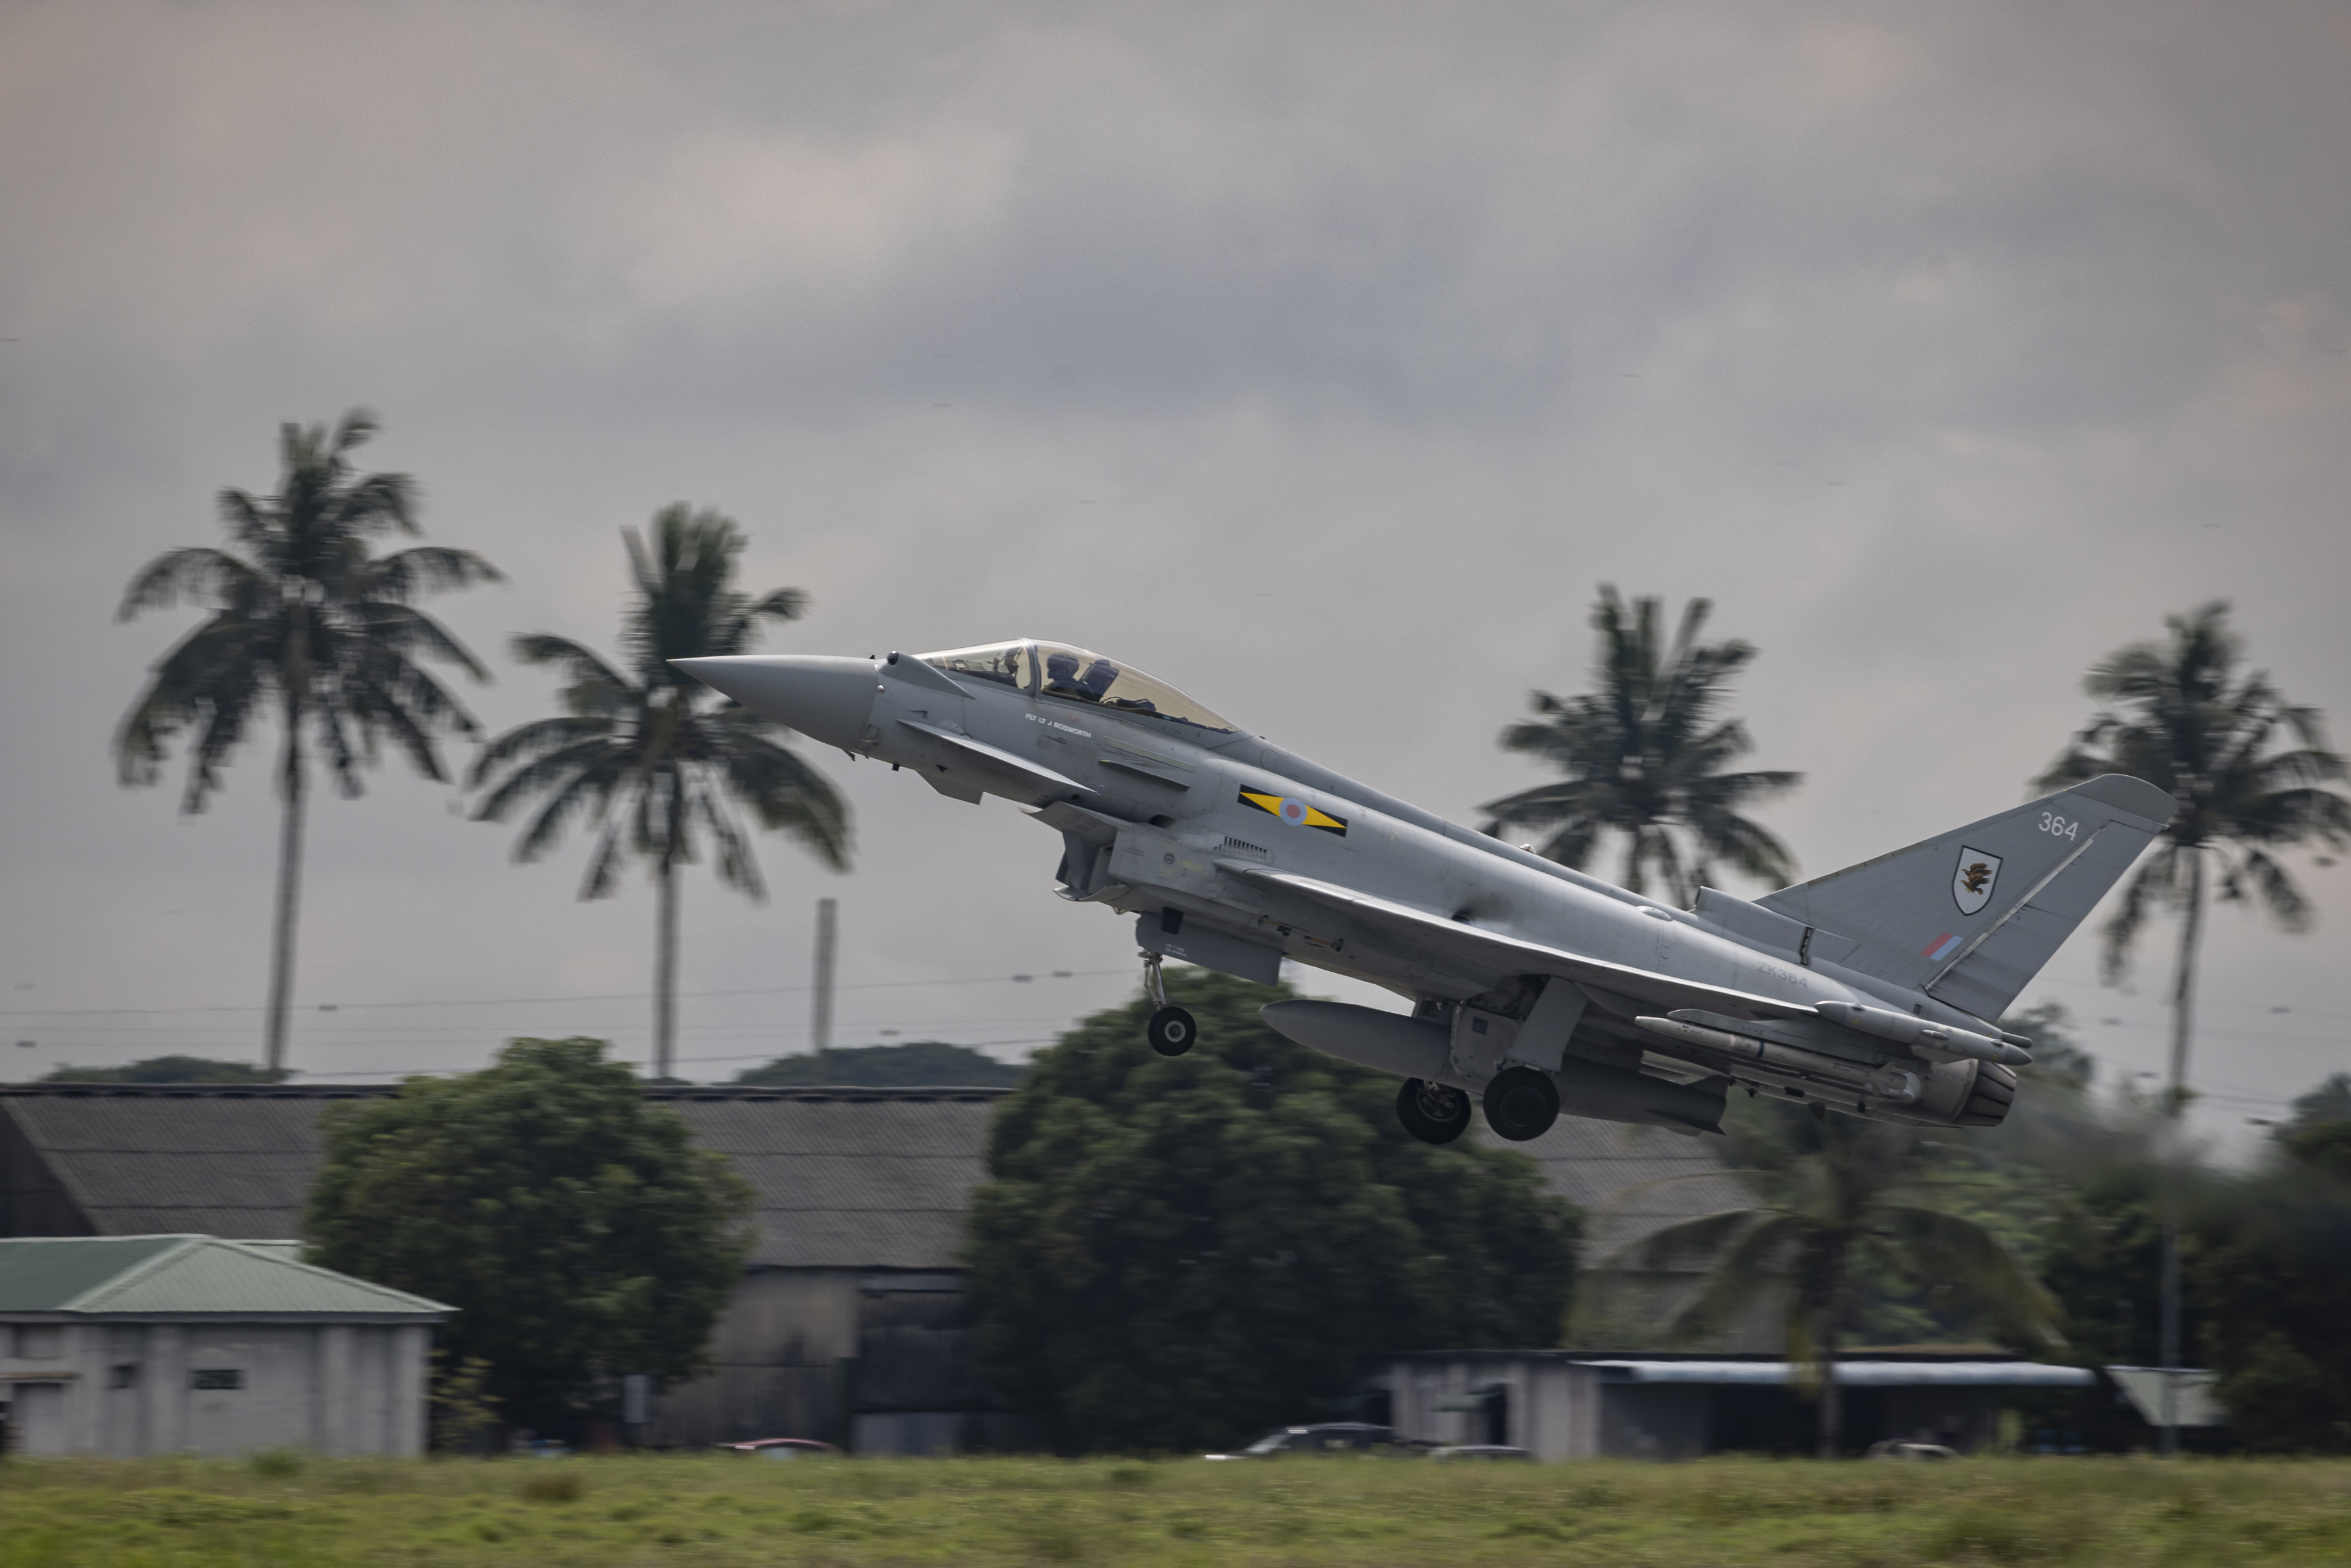 military aircraft taking off from runway with palm trees in background